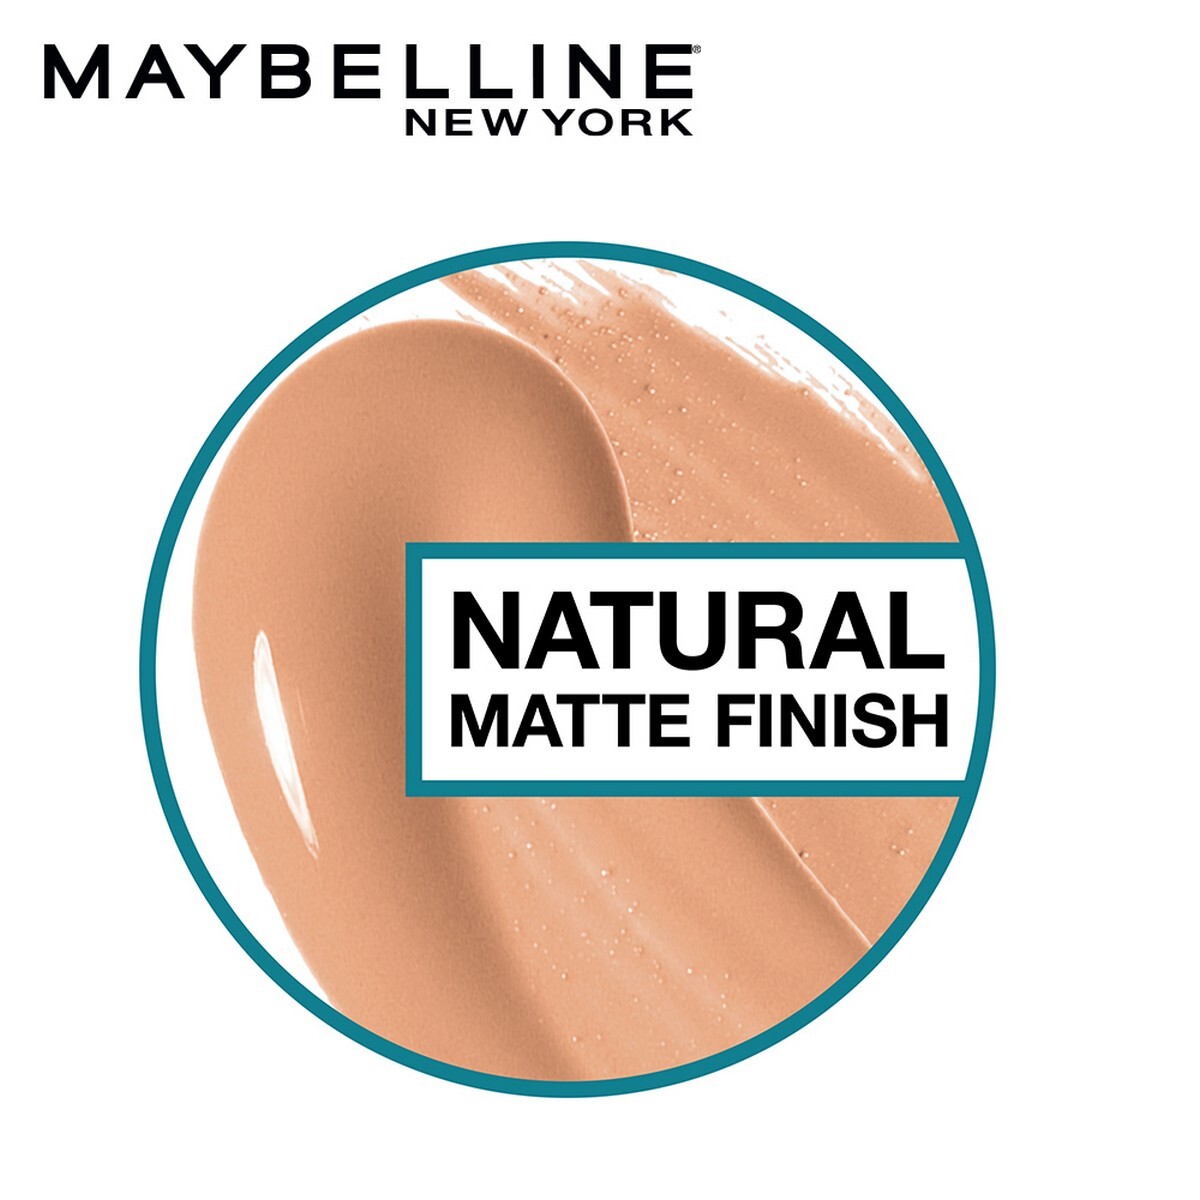 Maybelline New York Fit Me Matte + Poreless Liquid Foundation, 330 Toffee , Matte Foundation , Oil Control Foundation , Foundation With SPF, 30 ml